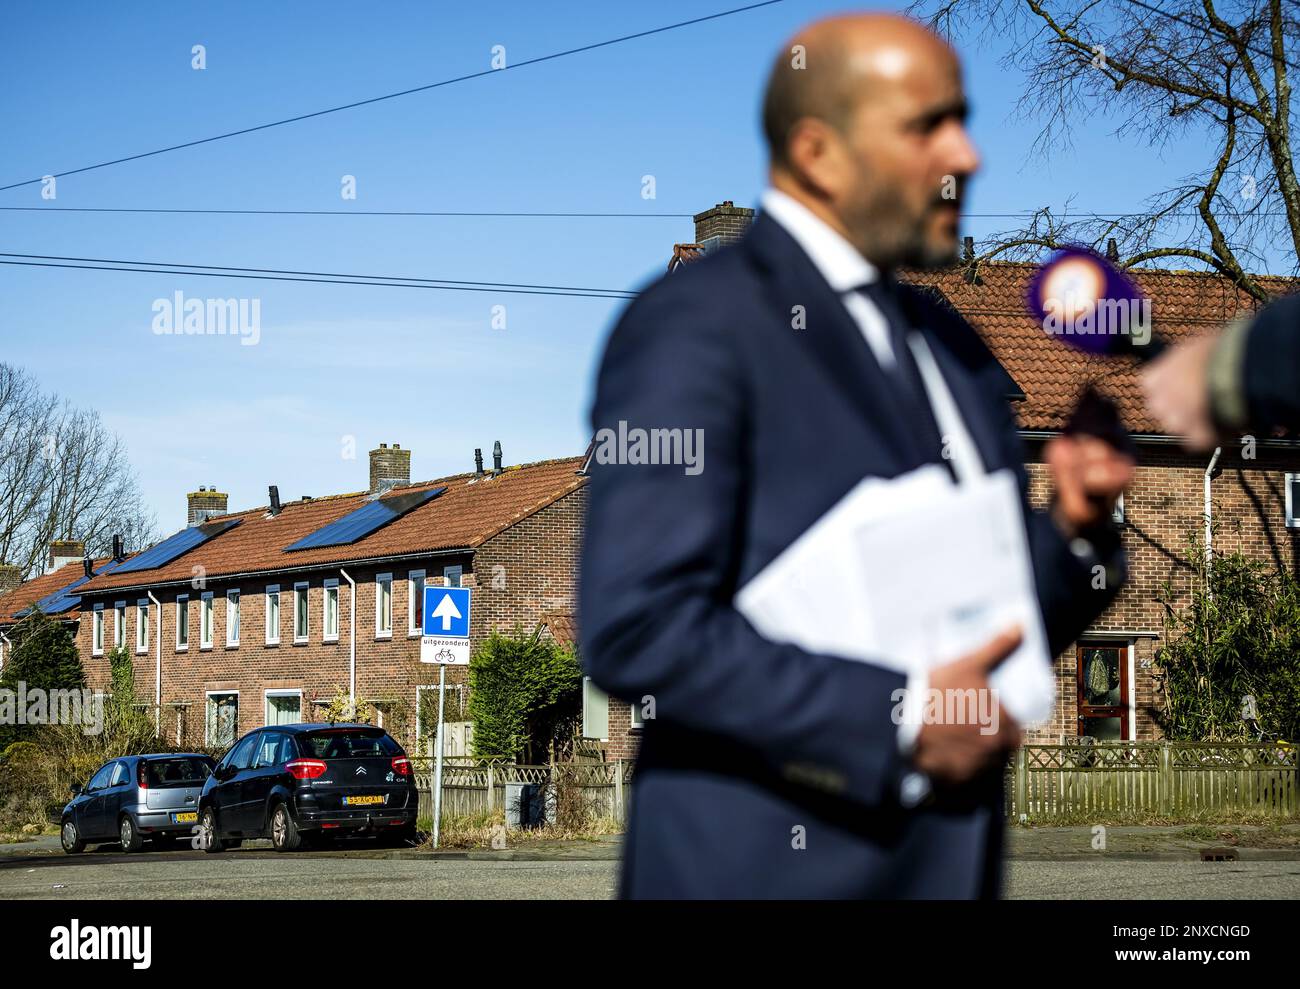 ARNHEM - Mayor Ahmed Marcouch during a voter turnout campaign for the Provincial Council elections on 15 March. ANP REMKO DE WAAL netherlands out - belgium out Stock Photo